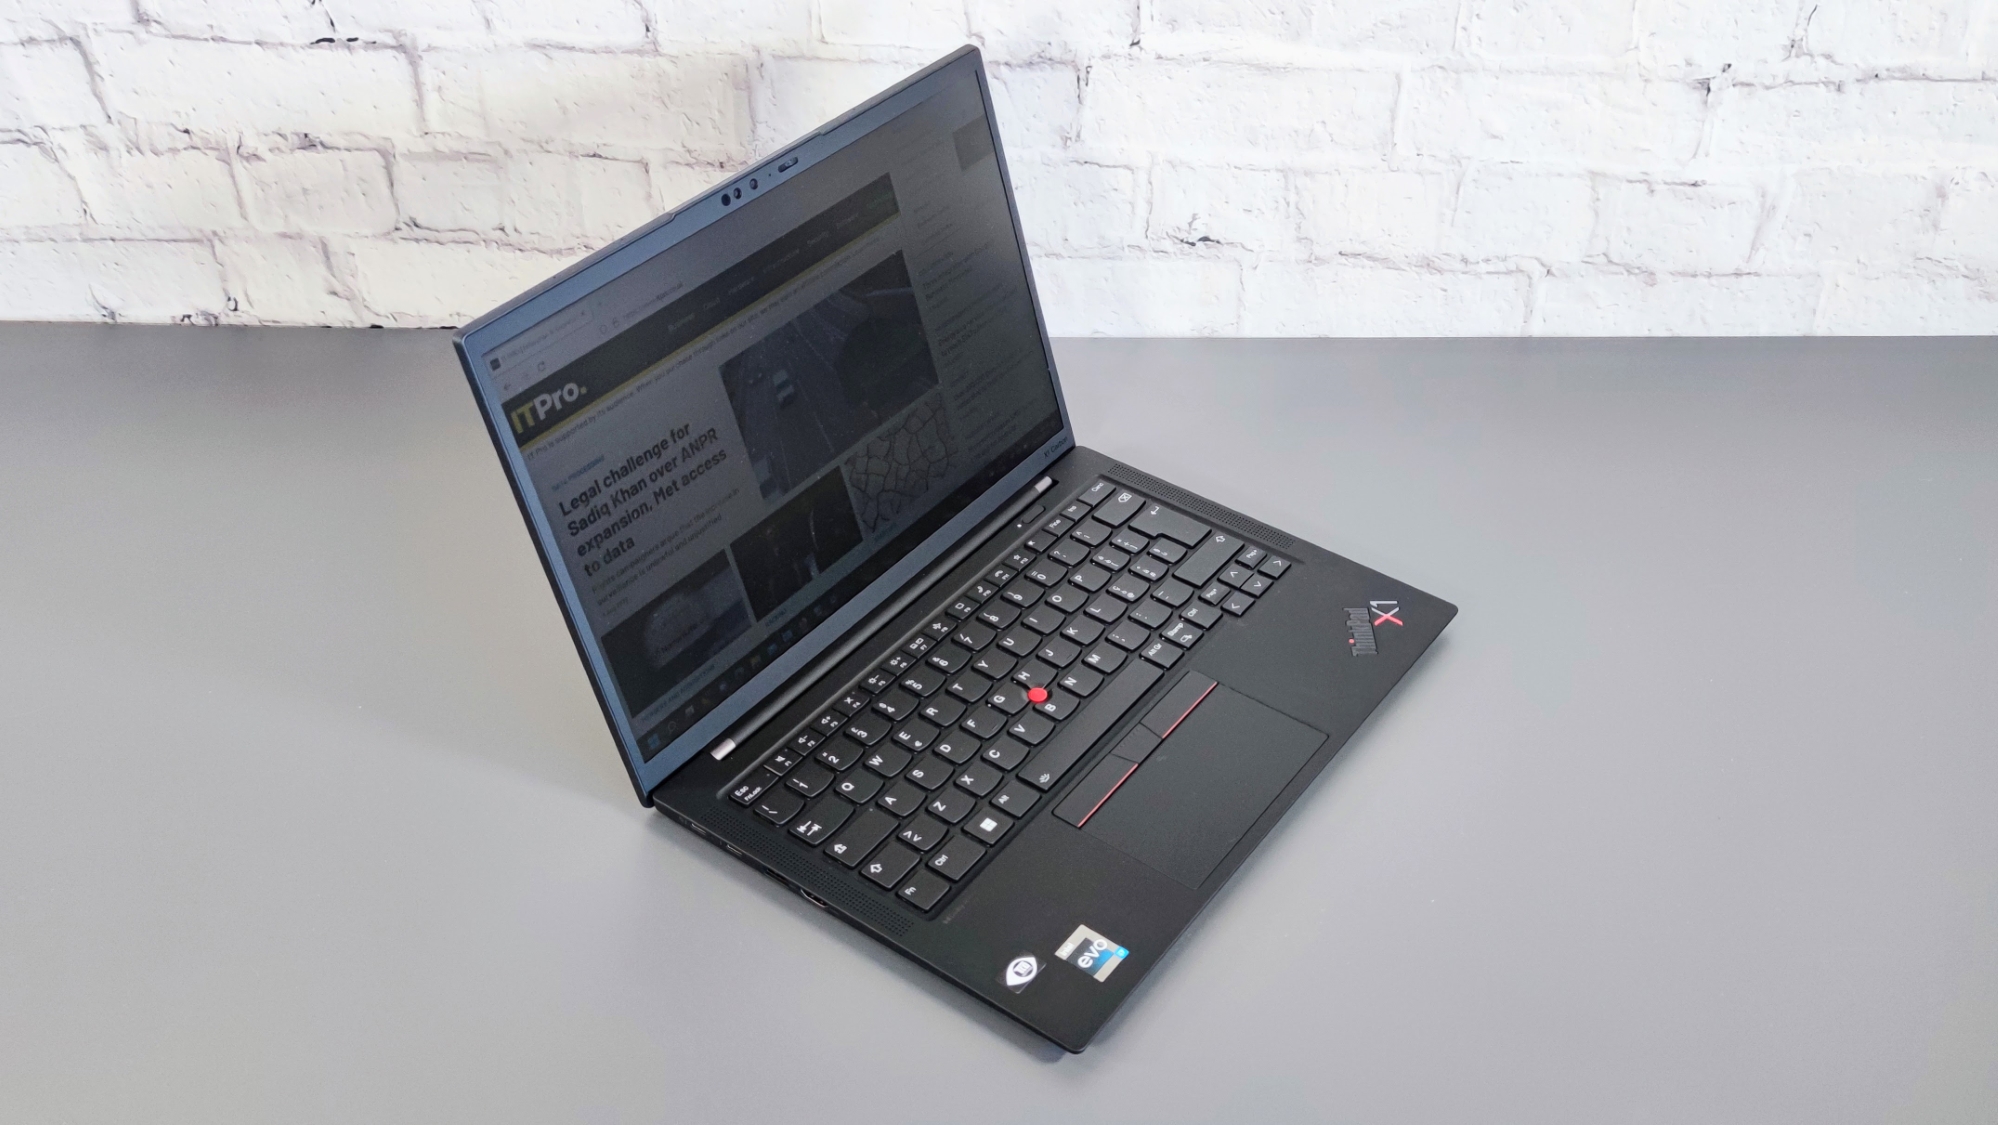 Lenovo ThinkPad X1 Carbon (Linux Edition) Review: A Top-Notch Laptop